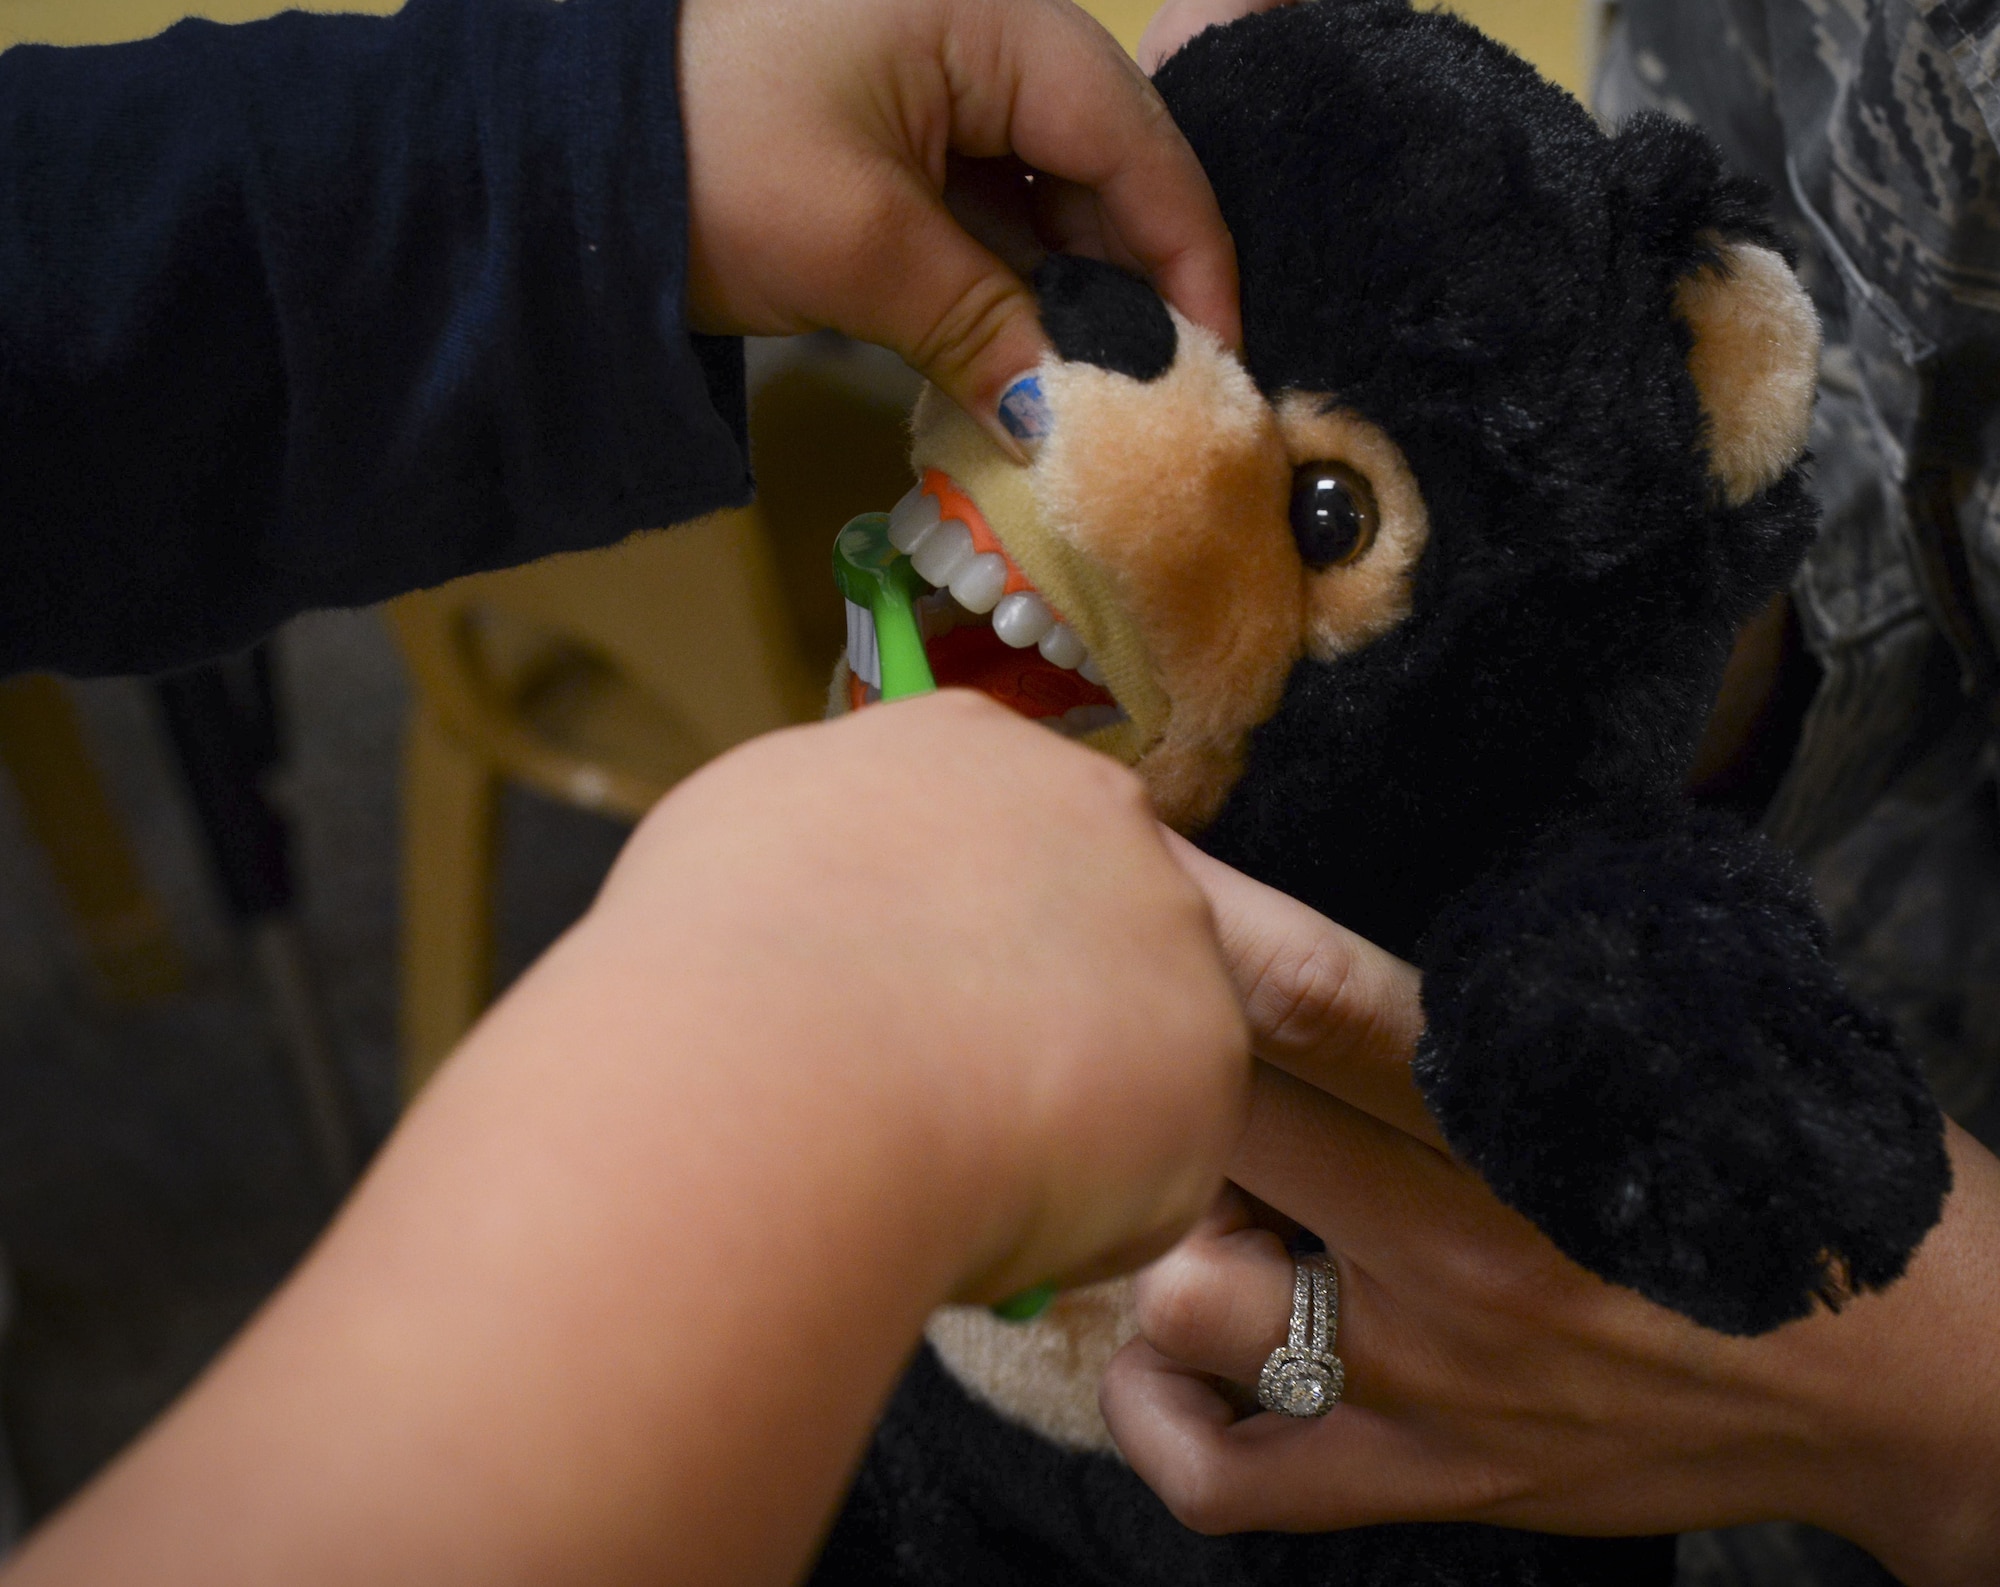 A child from Moody’s Child Development Center practices brushing teeth on a doll, Feb. 1, 2018, at Moody Air Force Base, Ga. Dental assistants from the 23d Aerospace Medicine Squadron visited the Child Development Center as part of National Children’s Dental Health Month, to teach children the importance of proper oral care and good habits for taking care of their teeth. (U.S. Air Force photo by Senior Airman Lauren M. Sprunk)